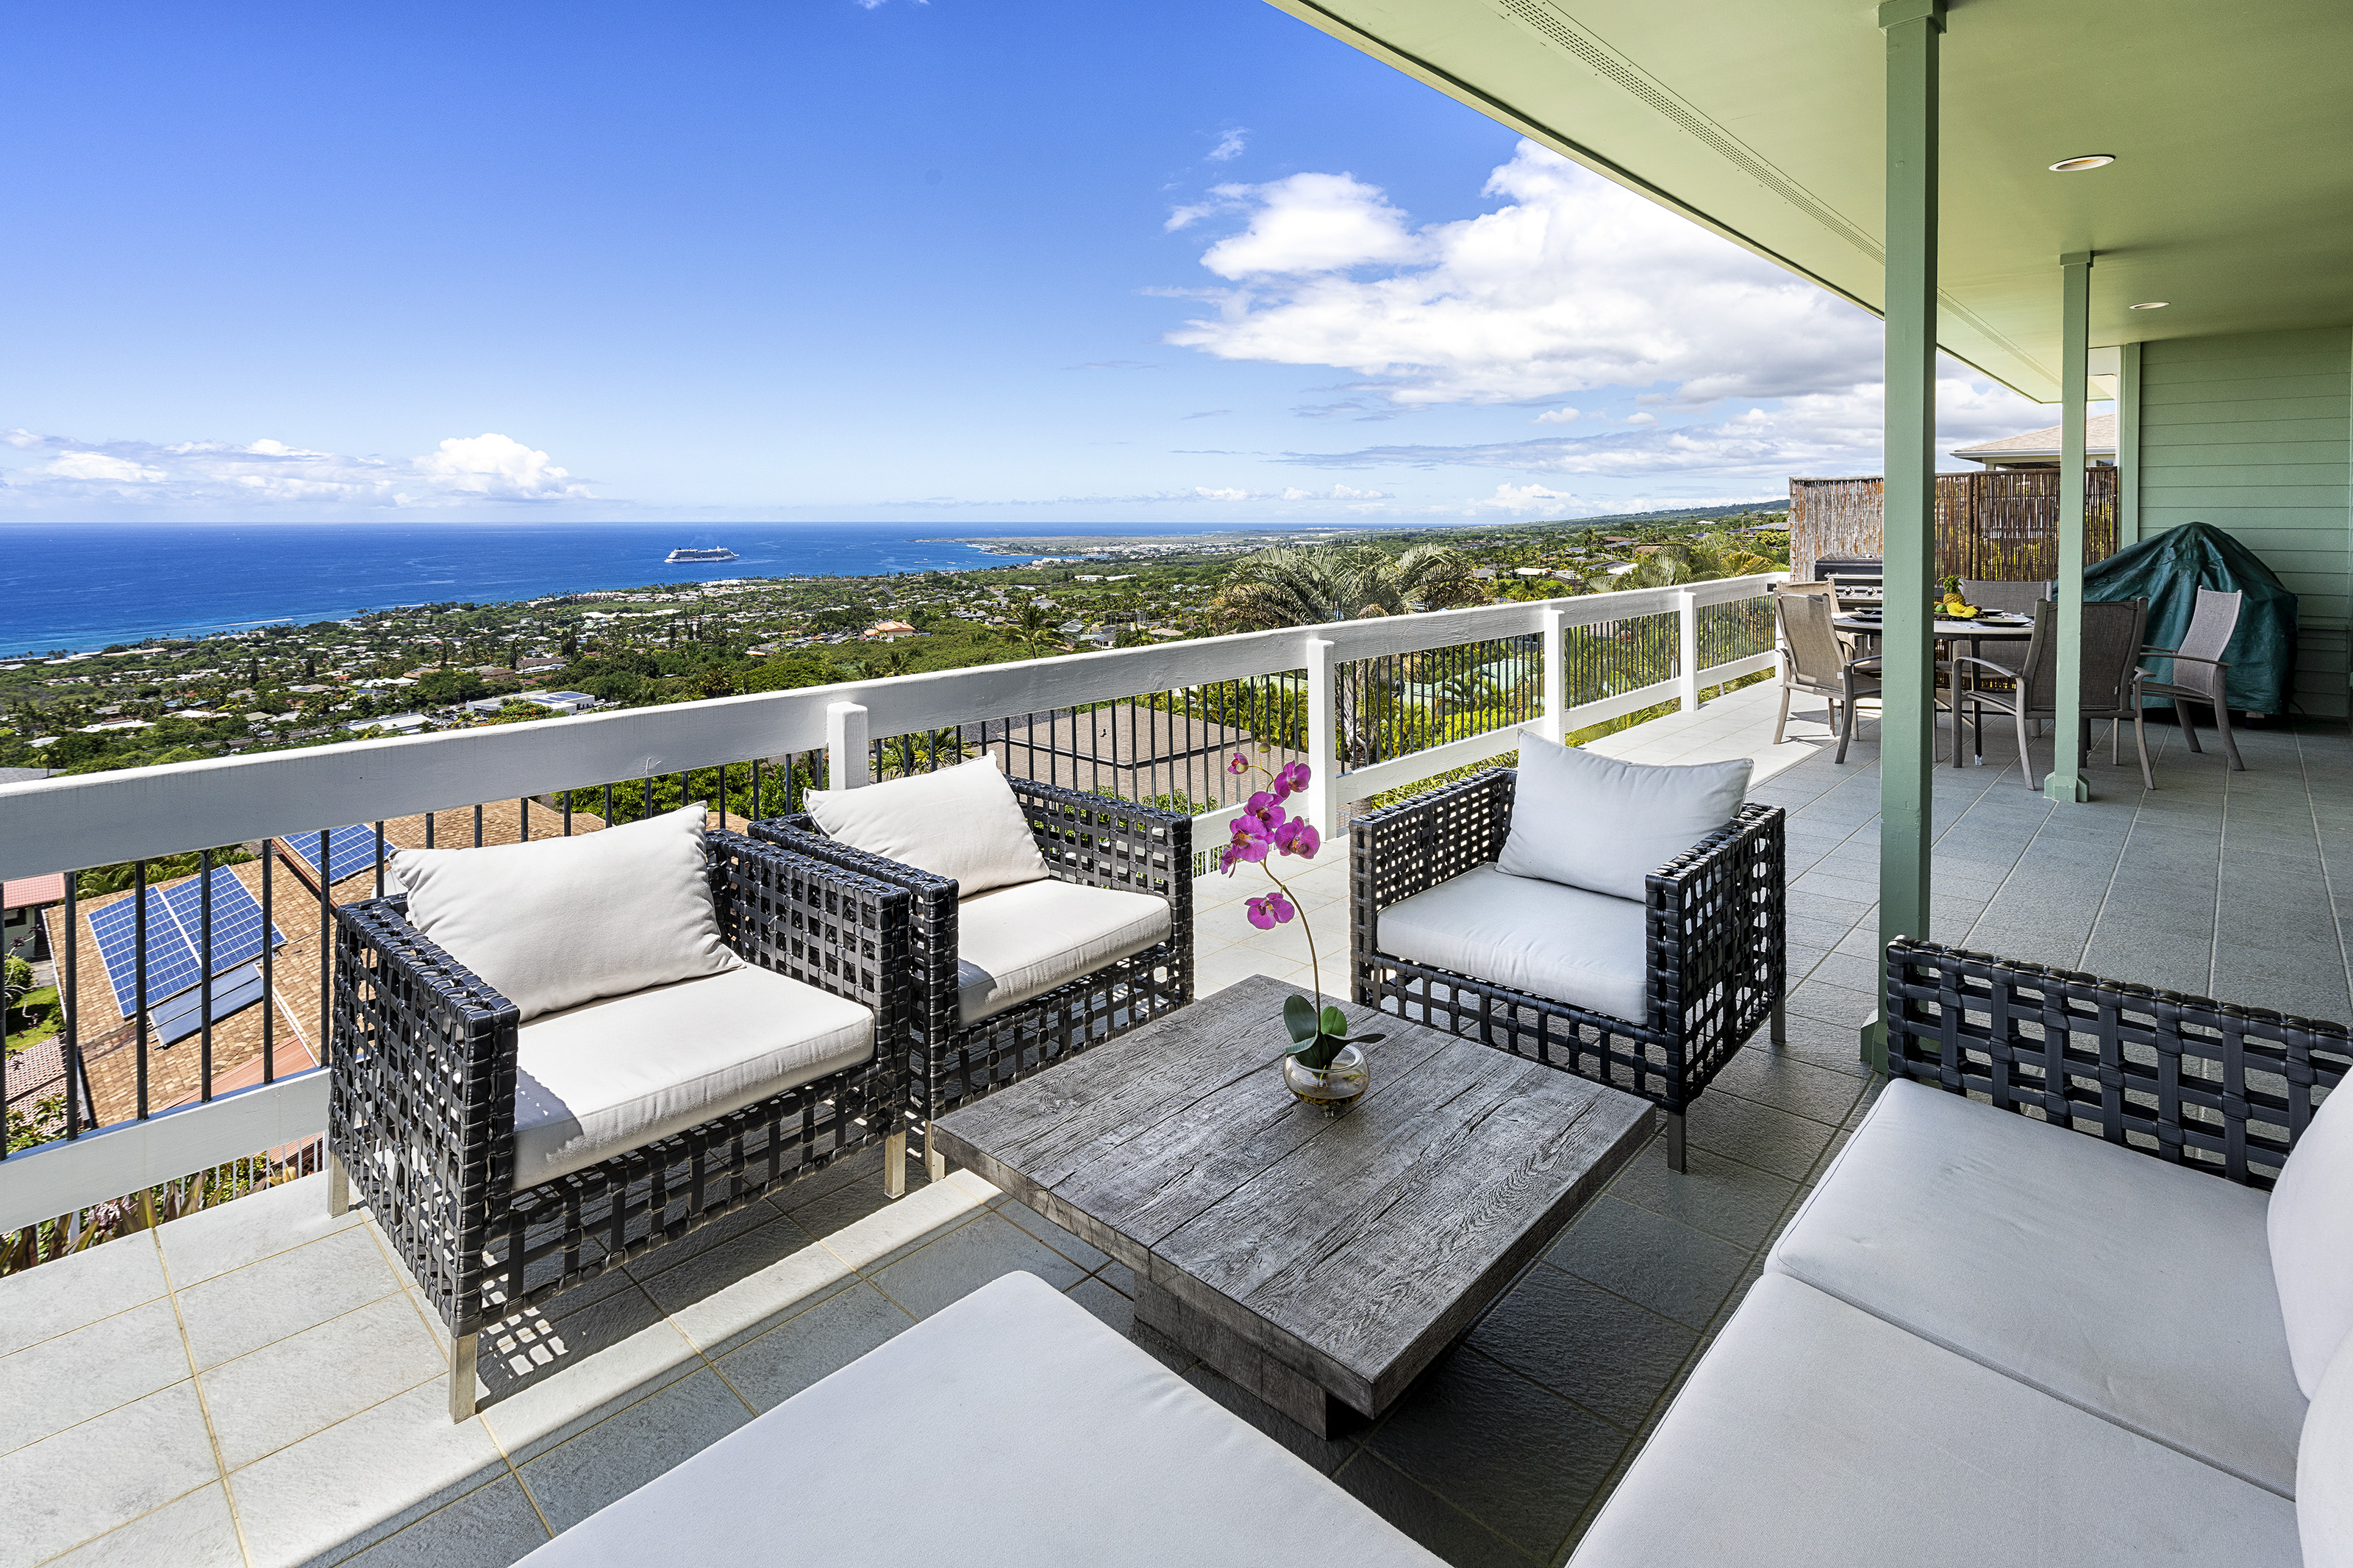 Enjoy time with your group on this private Lanai!